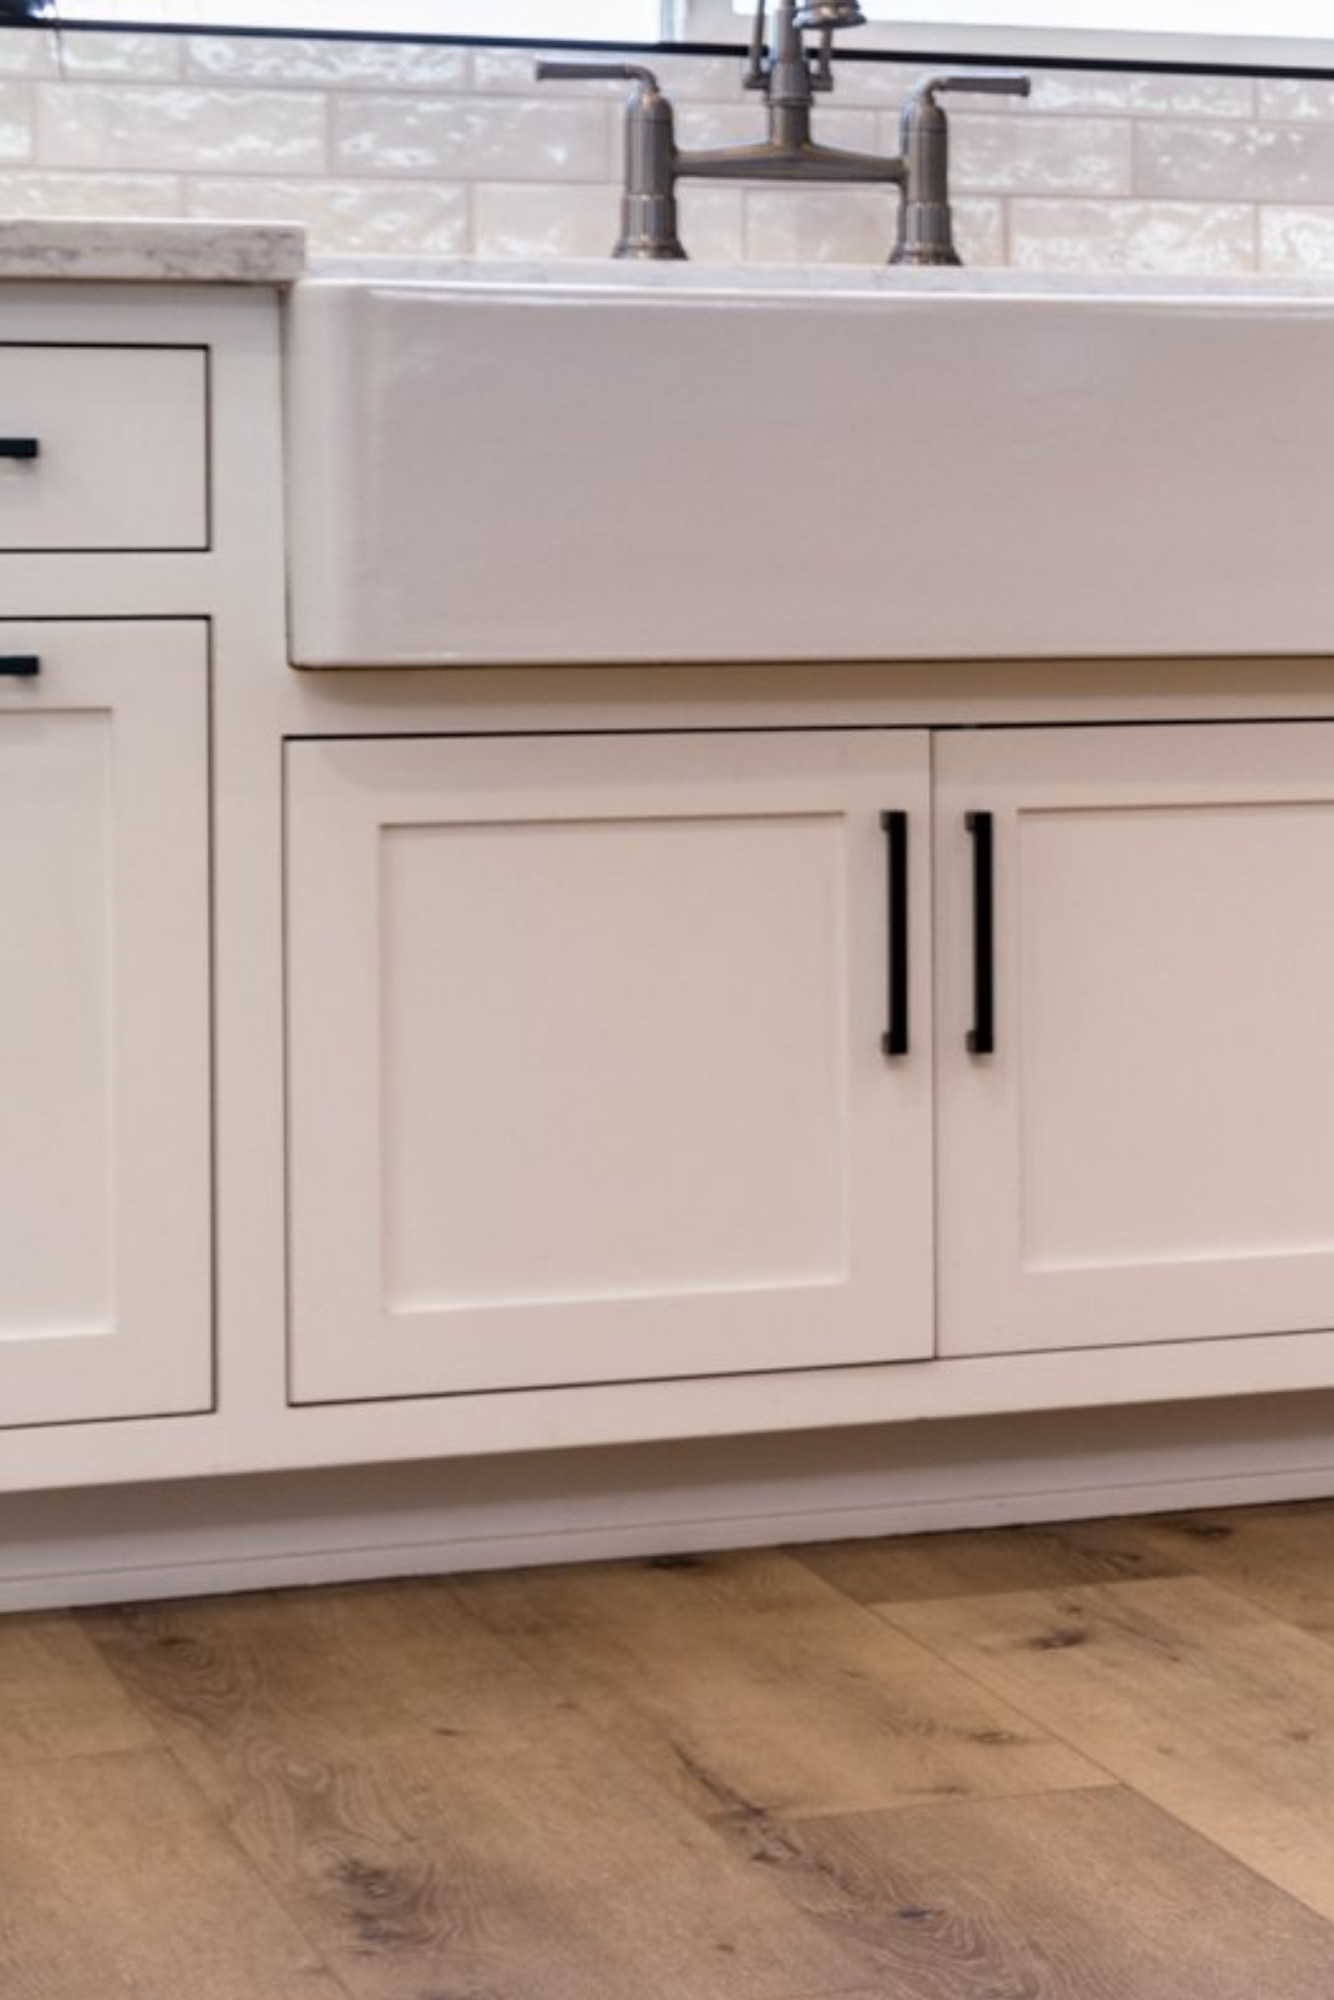 white kitchen cabinets with farmhouse curtain style sink and a white toe kick plate molding underneath